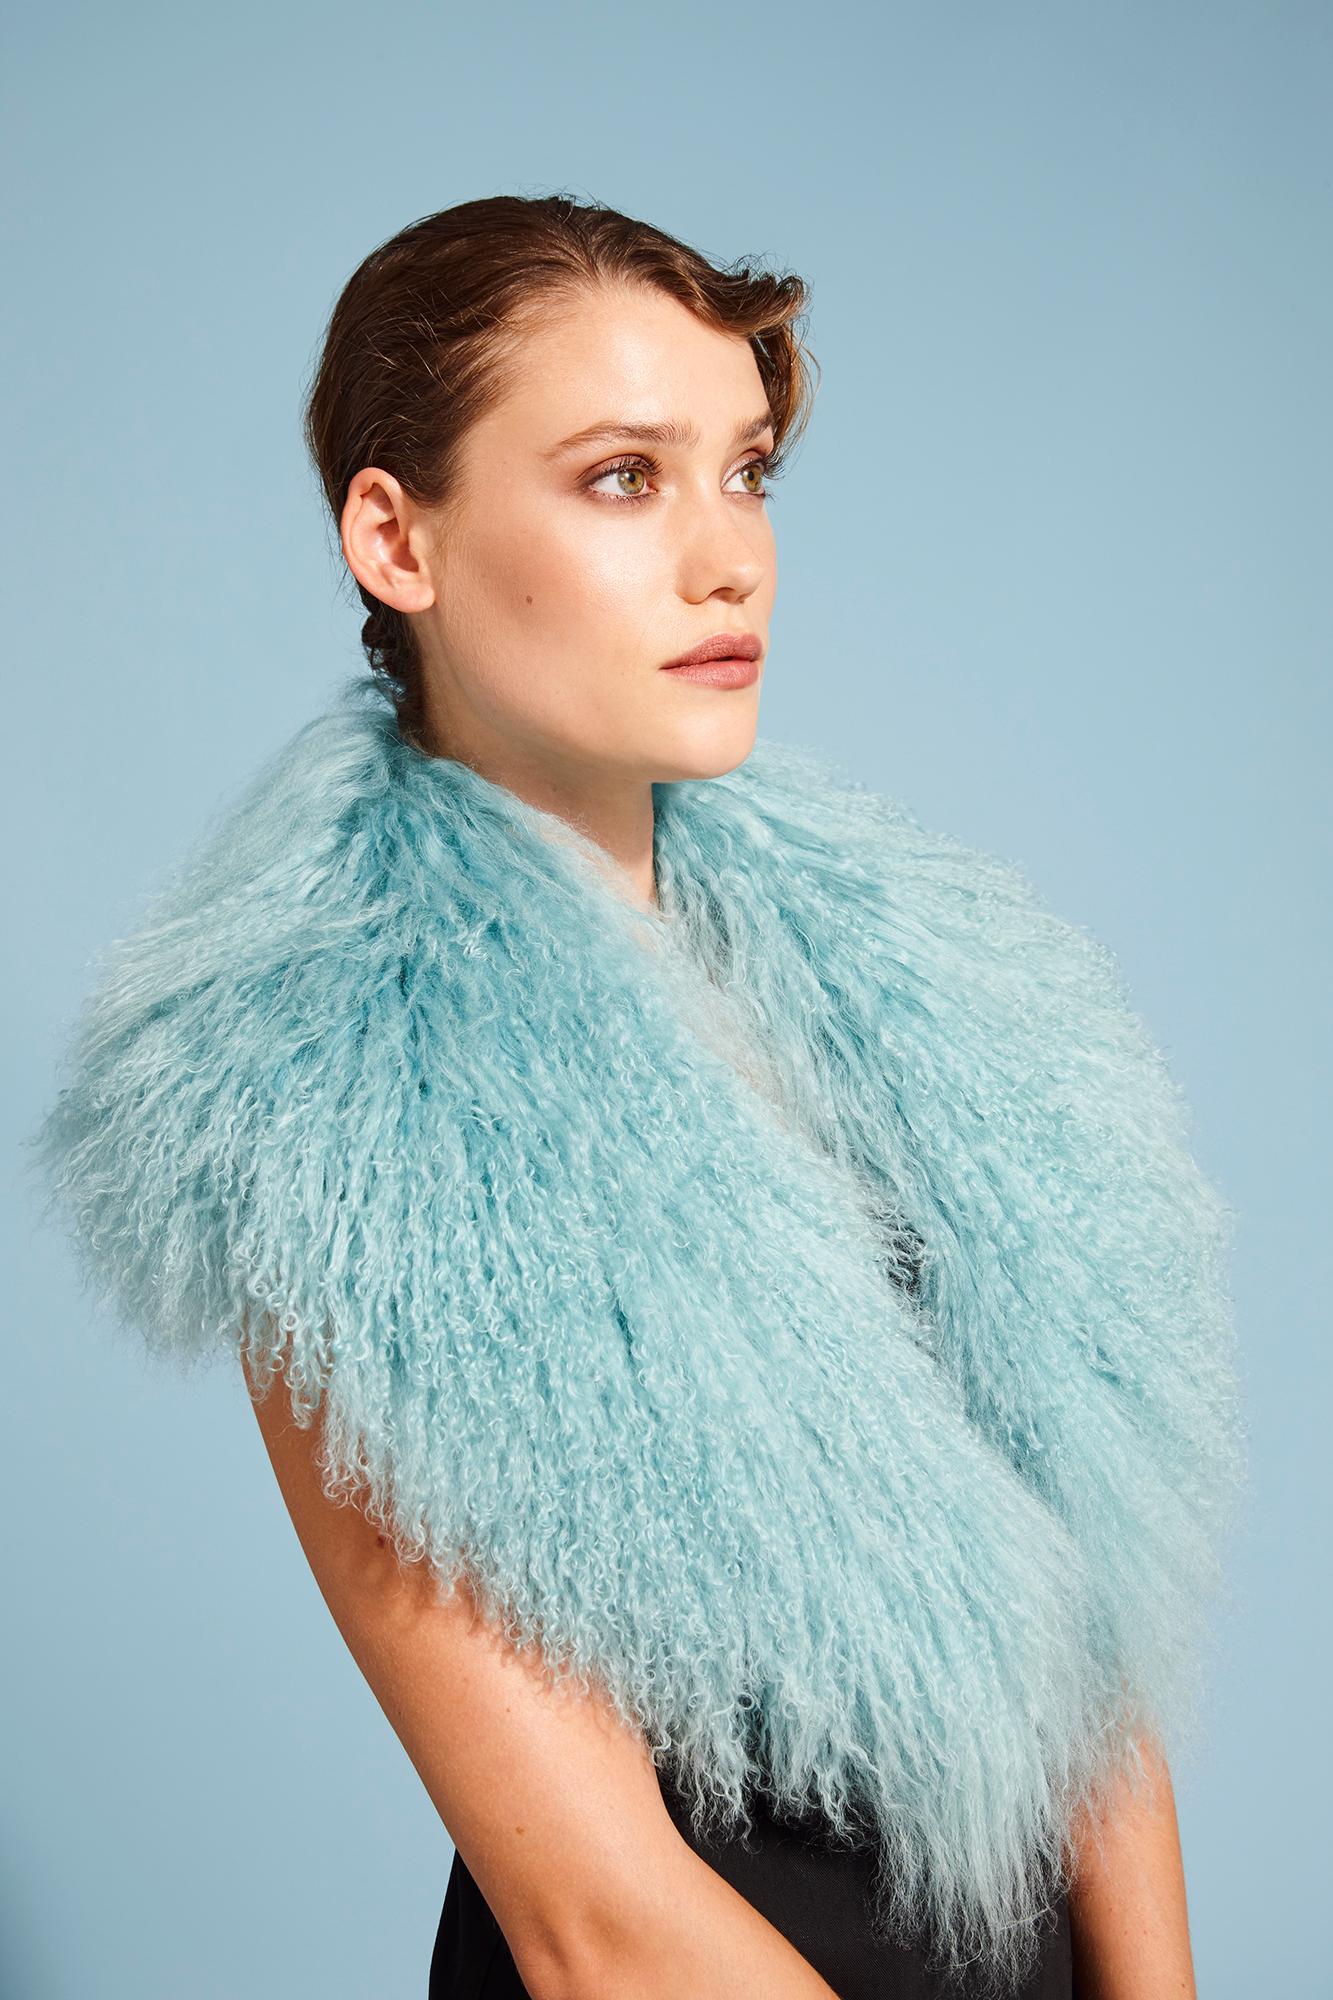 Verheyen London Shawl Collar in Aquamarine Blue Mongolian Lamb Fur  - Brand New 

The Shawl Collar is Verheyen London’s casual everyday design, which is perfectly shaped to wear over any outfit.  Designed for layering, this structured shape, crafted